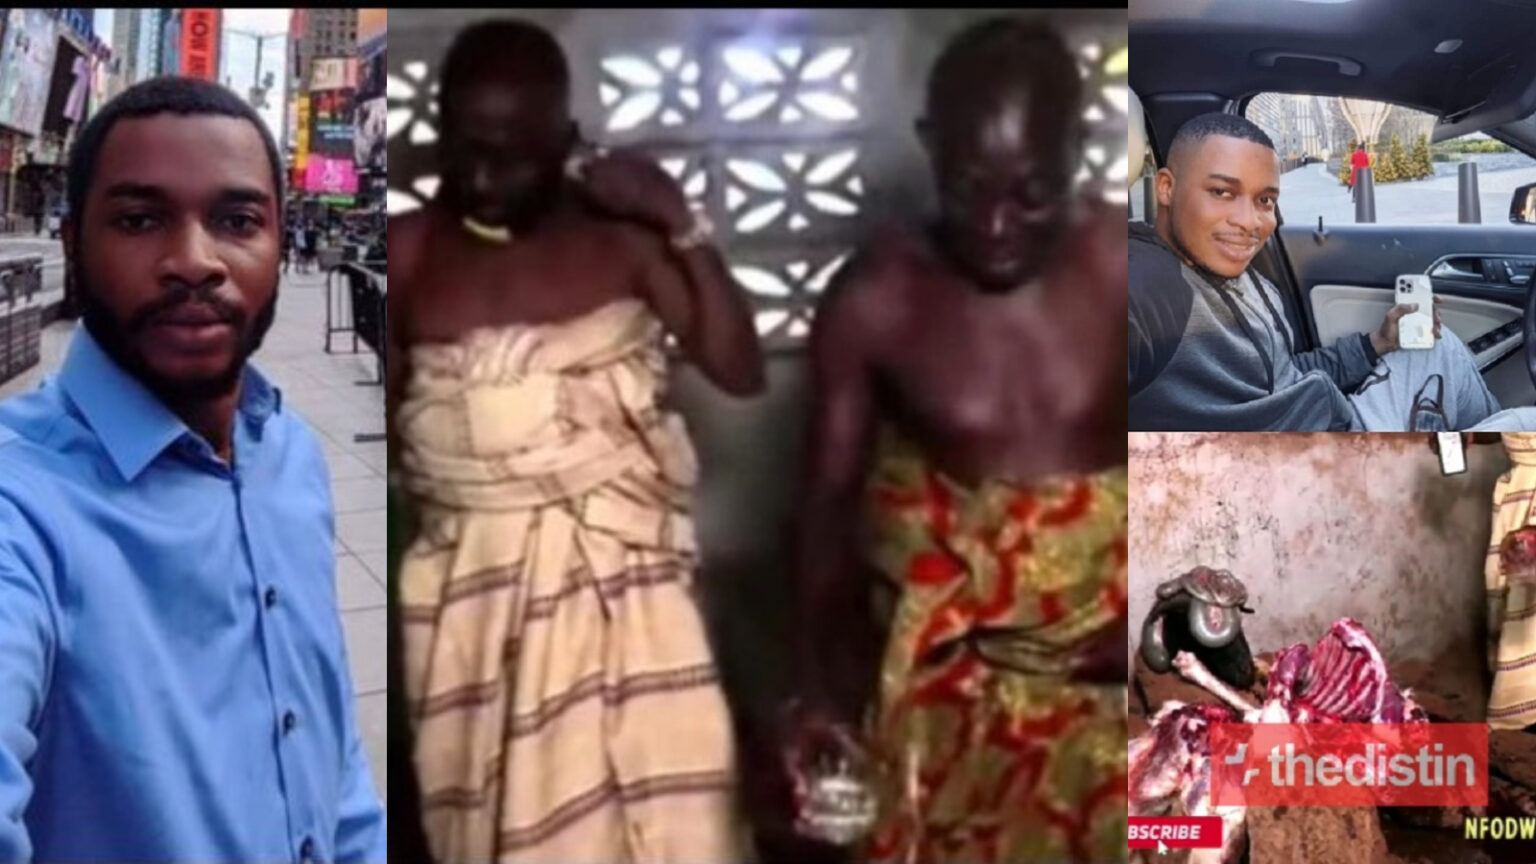 An alleged video of Bechem Traditional chiefs pouring libation and making sacrifice with a lamb on their gods incurring curses on a certain man dropped online.